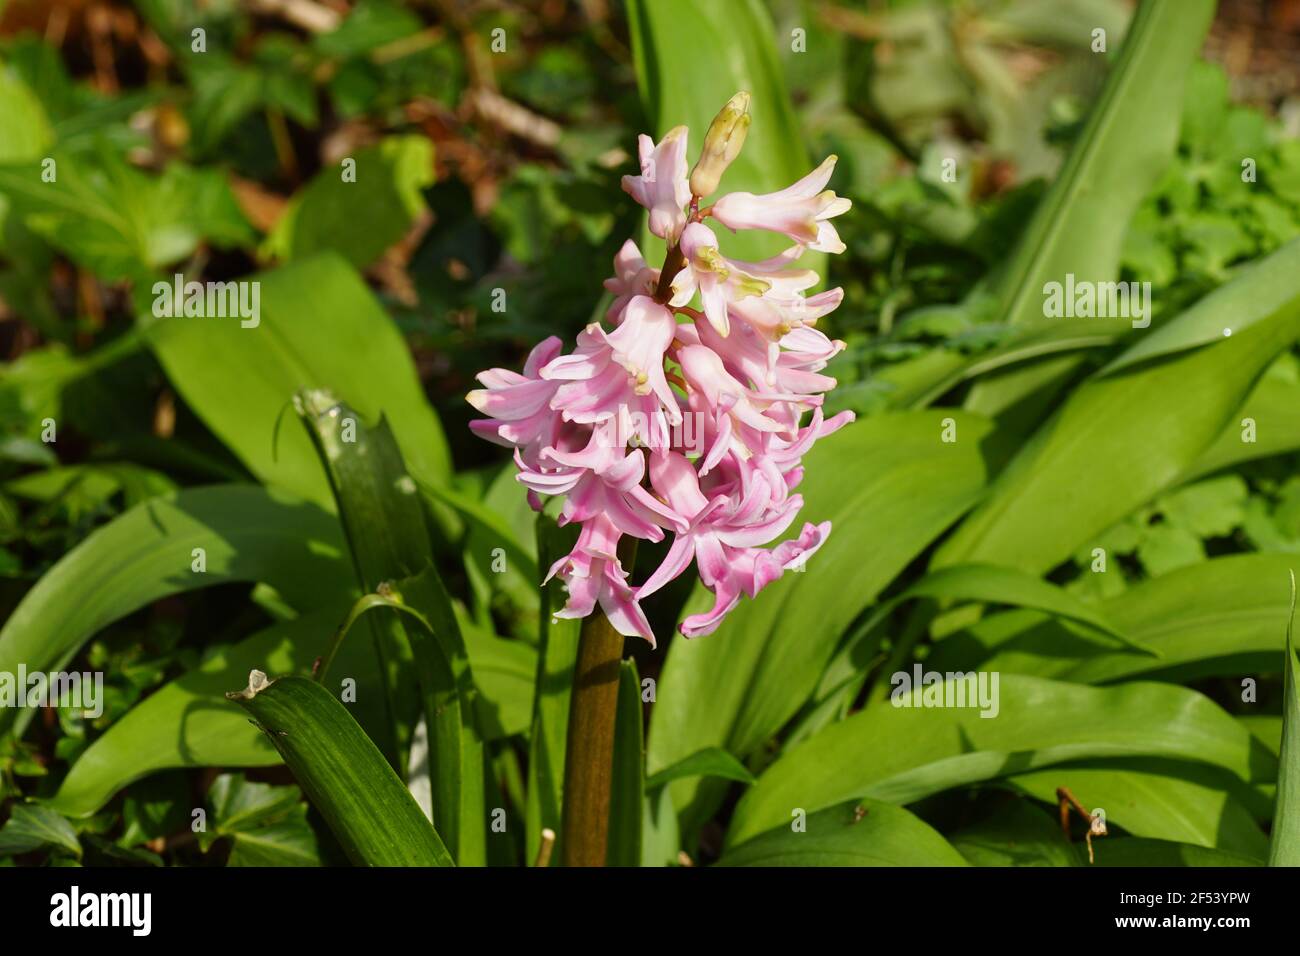 Common hyacinth, garden hyacinth (Hyacinthus orientalis),subfamily Scilloideae, family Asparagaceae. In the garden between faded leaves of wild garlic Stock Photo